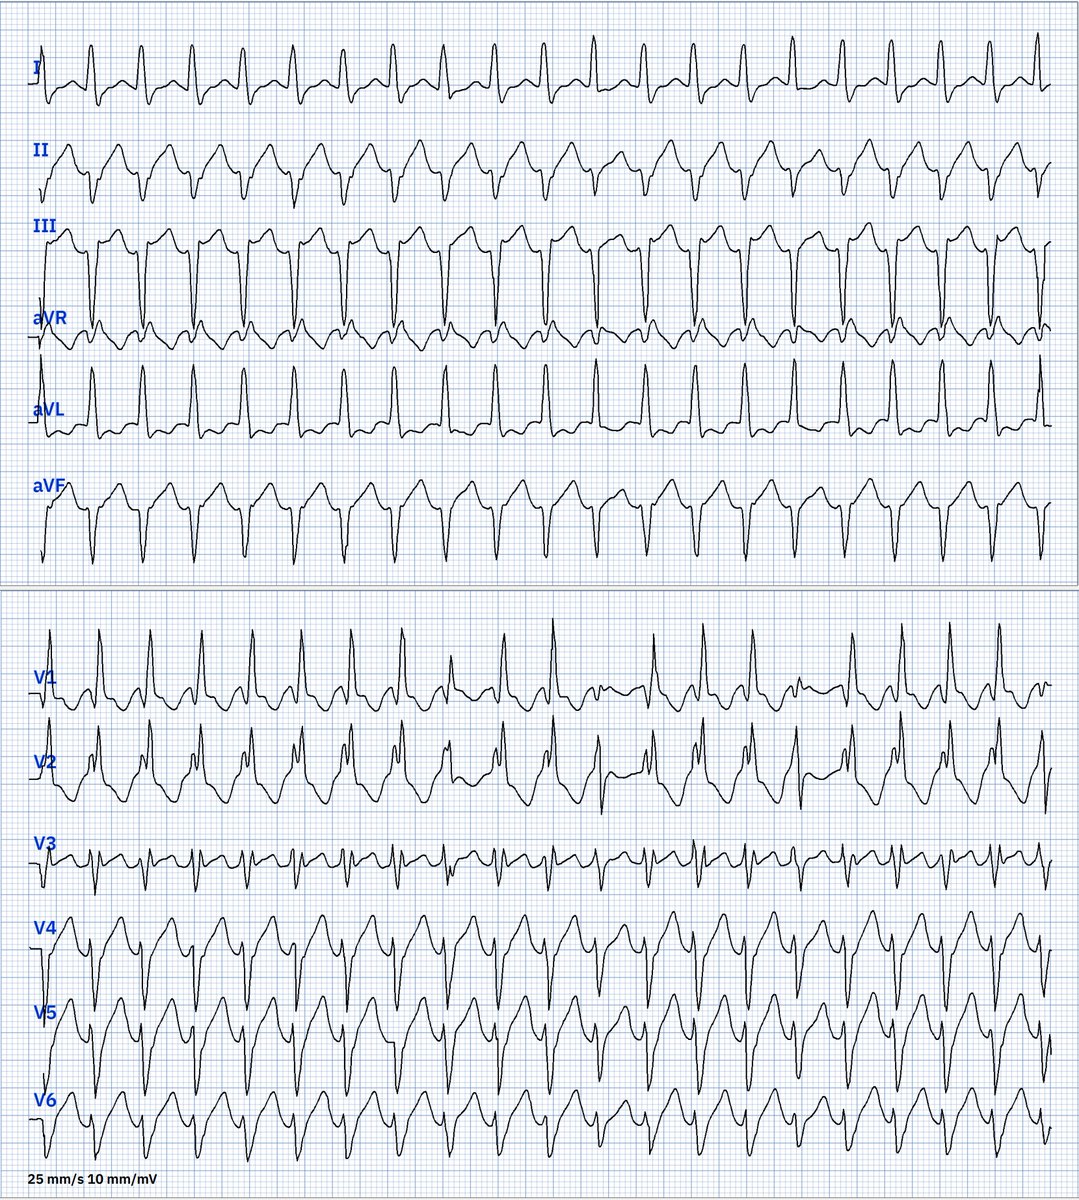 Most of us are not EP specialists. We just want to know where this VT is coming from (RV/LV) and whether it is more benign (outflow tract tachycardia) or malignant (related to CHD/IHD). What can you say about this tachycardia?